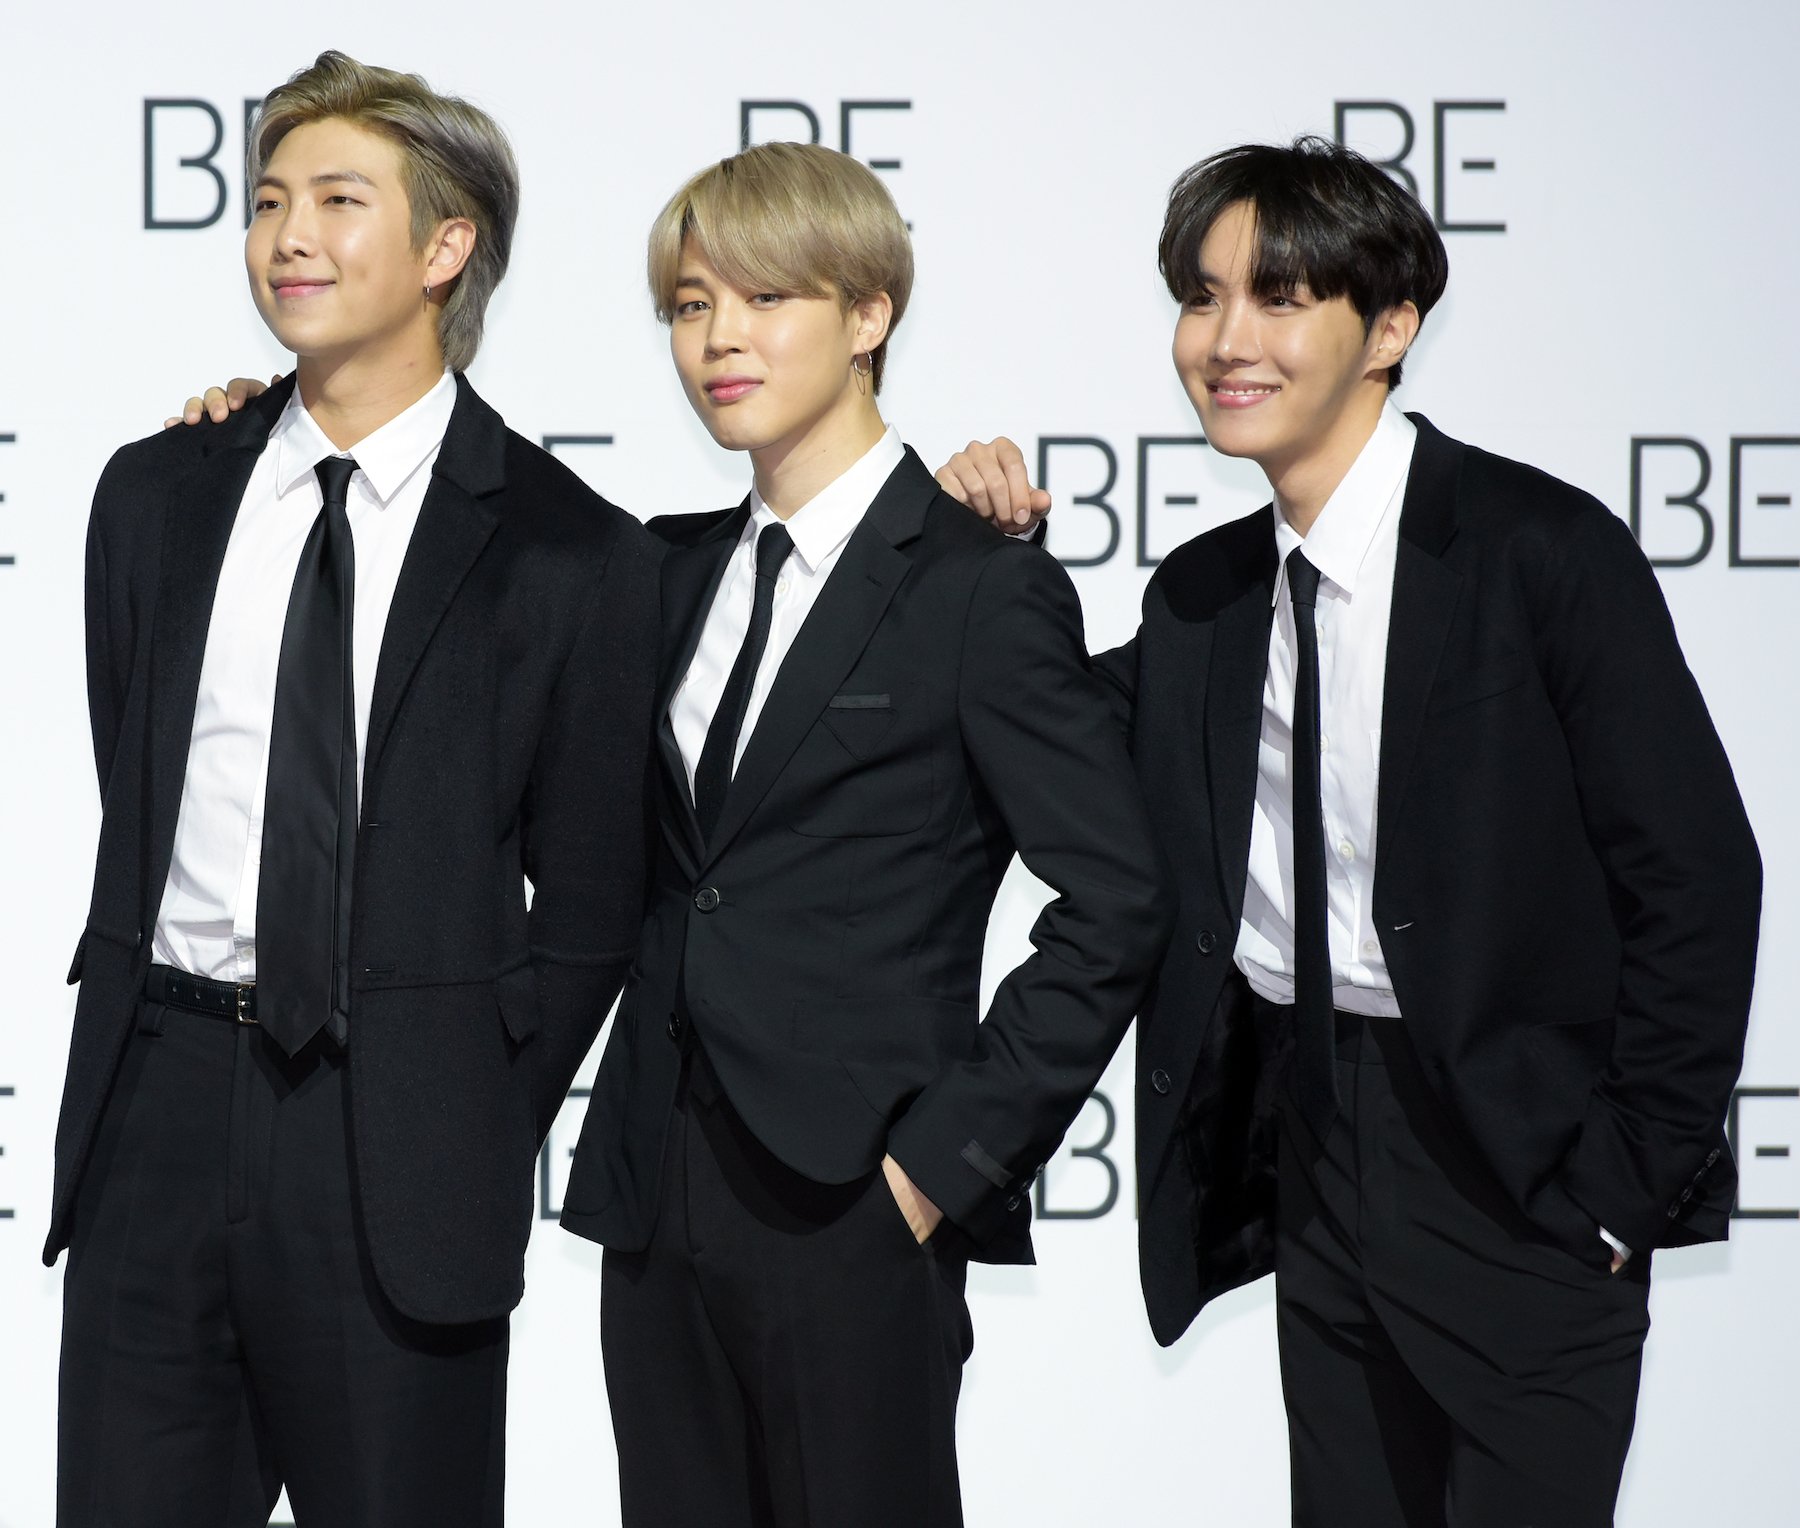 RM, Jimin, and J-Hope of the boy band, BTS, at the press conference for their album, 'BE (Deluxe Edition)'